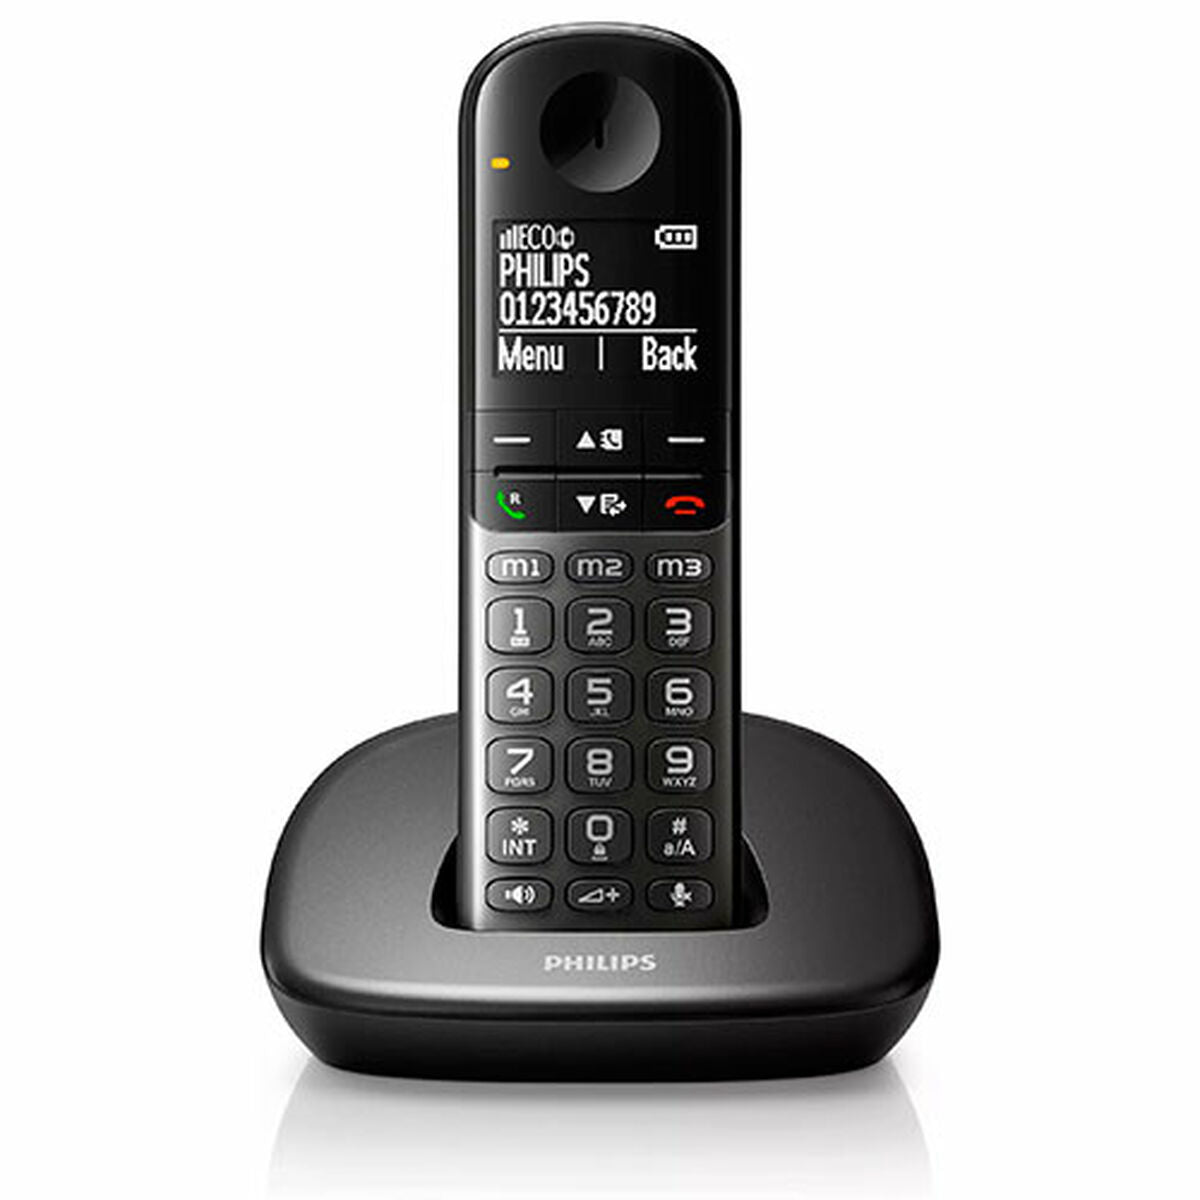 Wireless Phone Philips XL4901DS/34, Philips, Electronics, Landline telephones and accessories, wireless-phone-philips-xl4901ds-34, Brand_Philips, category-reference-2609, category-reference-2617, category-reference-2619, category-reference-t-18372, category-reference-t-19653, Condition_NEW, office, Price_50 - 100, telephones & tablets, Teleworking, RiotNook